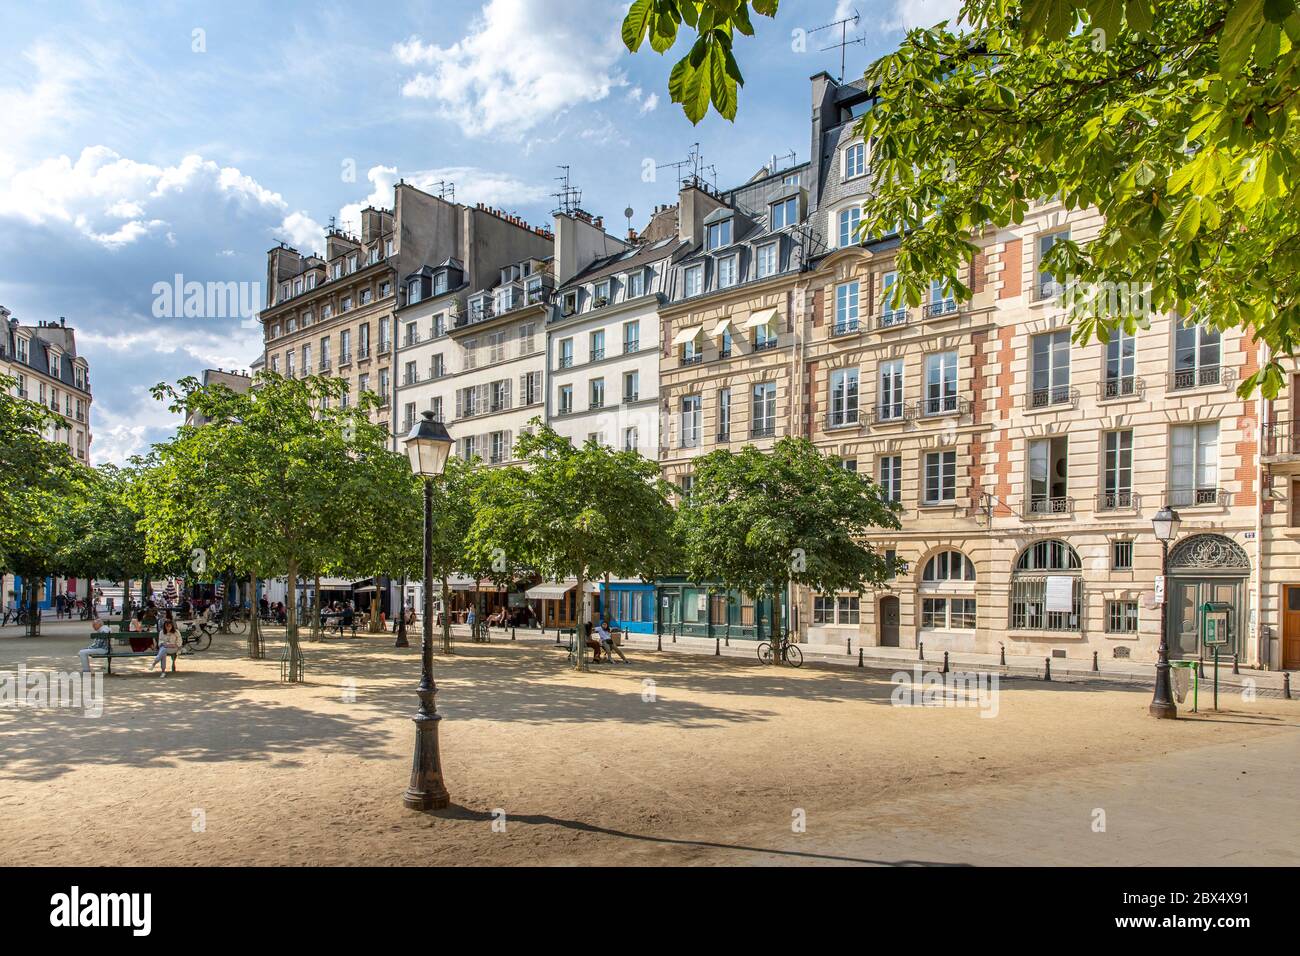 Paris, France - June 3, 2020: People eat again on the terrace of the restaurants after the end of lockdown. Place Dauphine in Paris, France Stock Photo